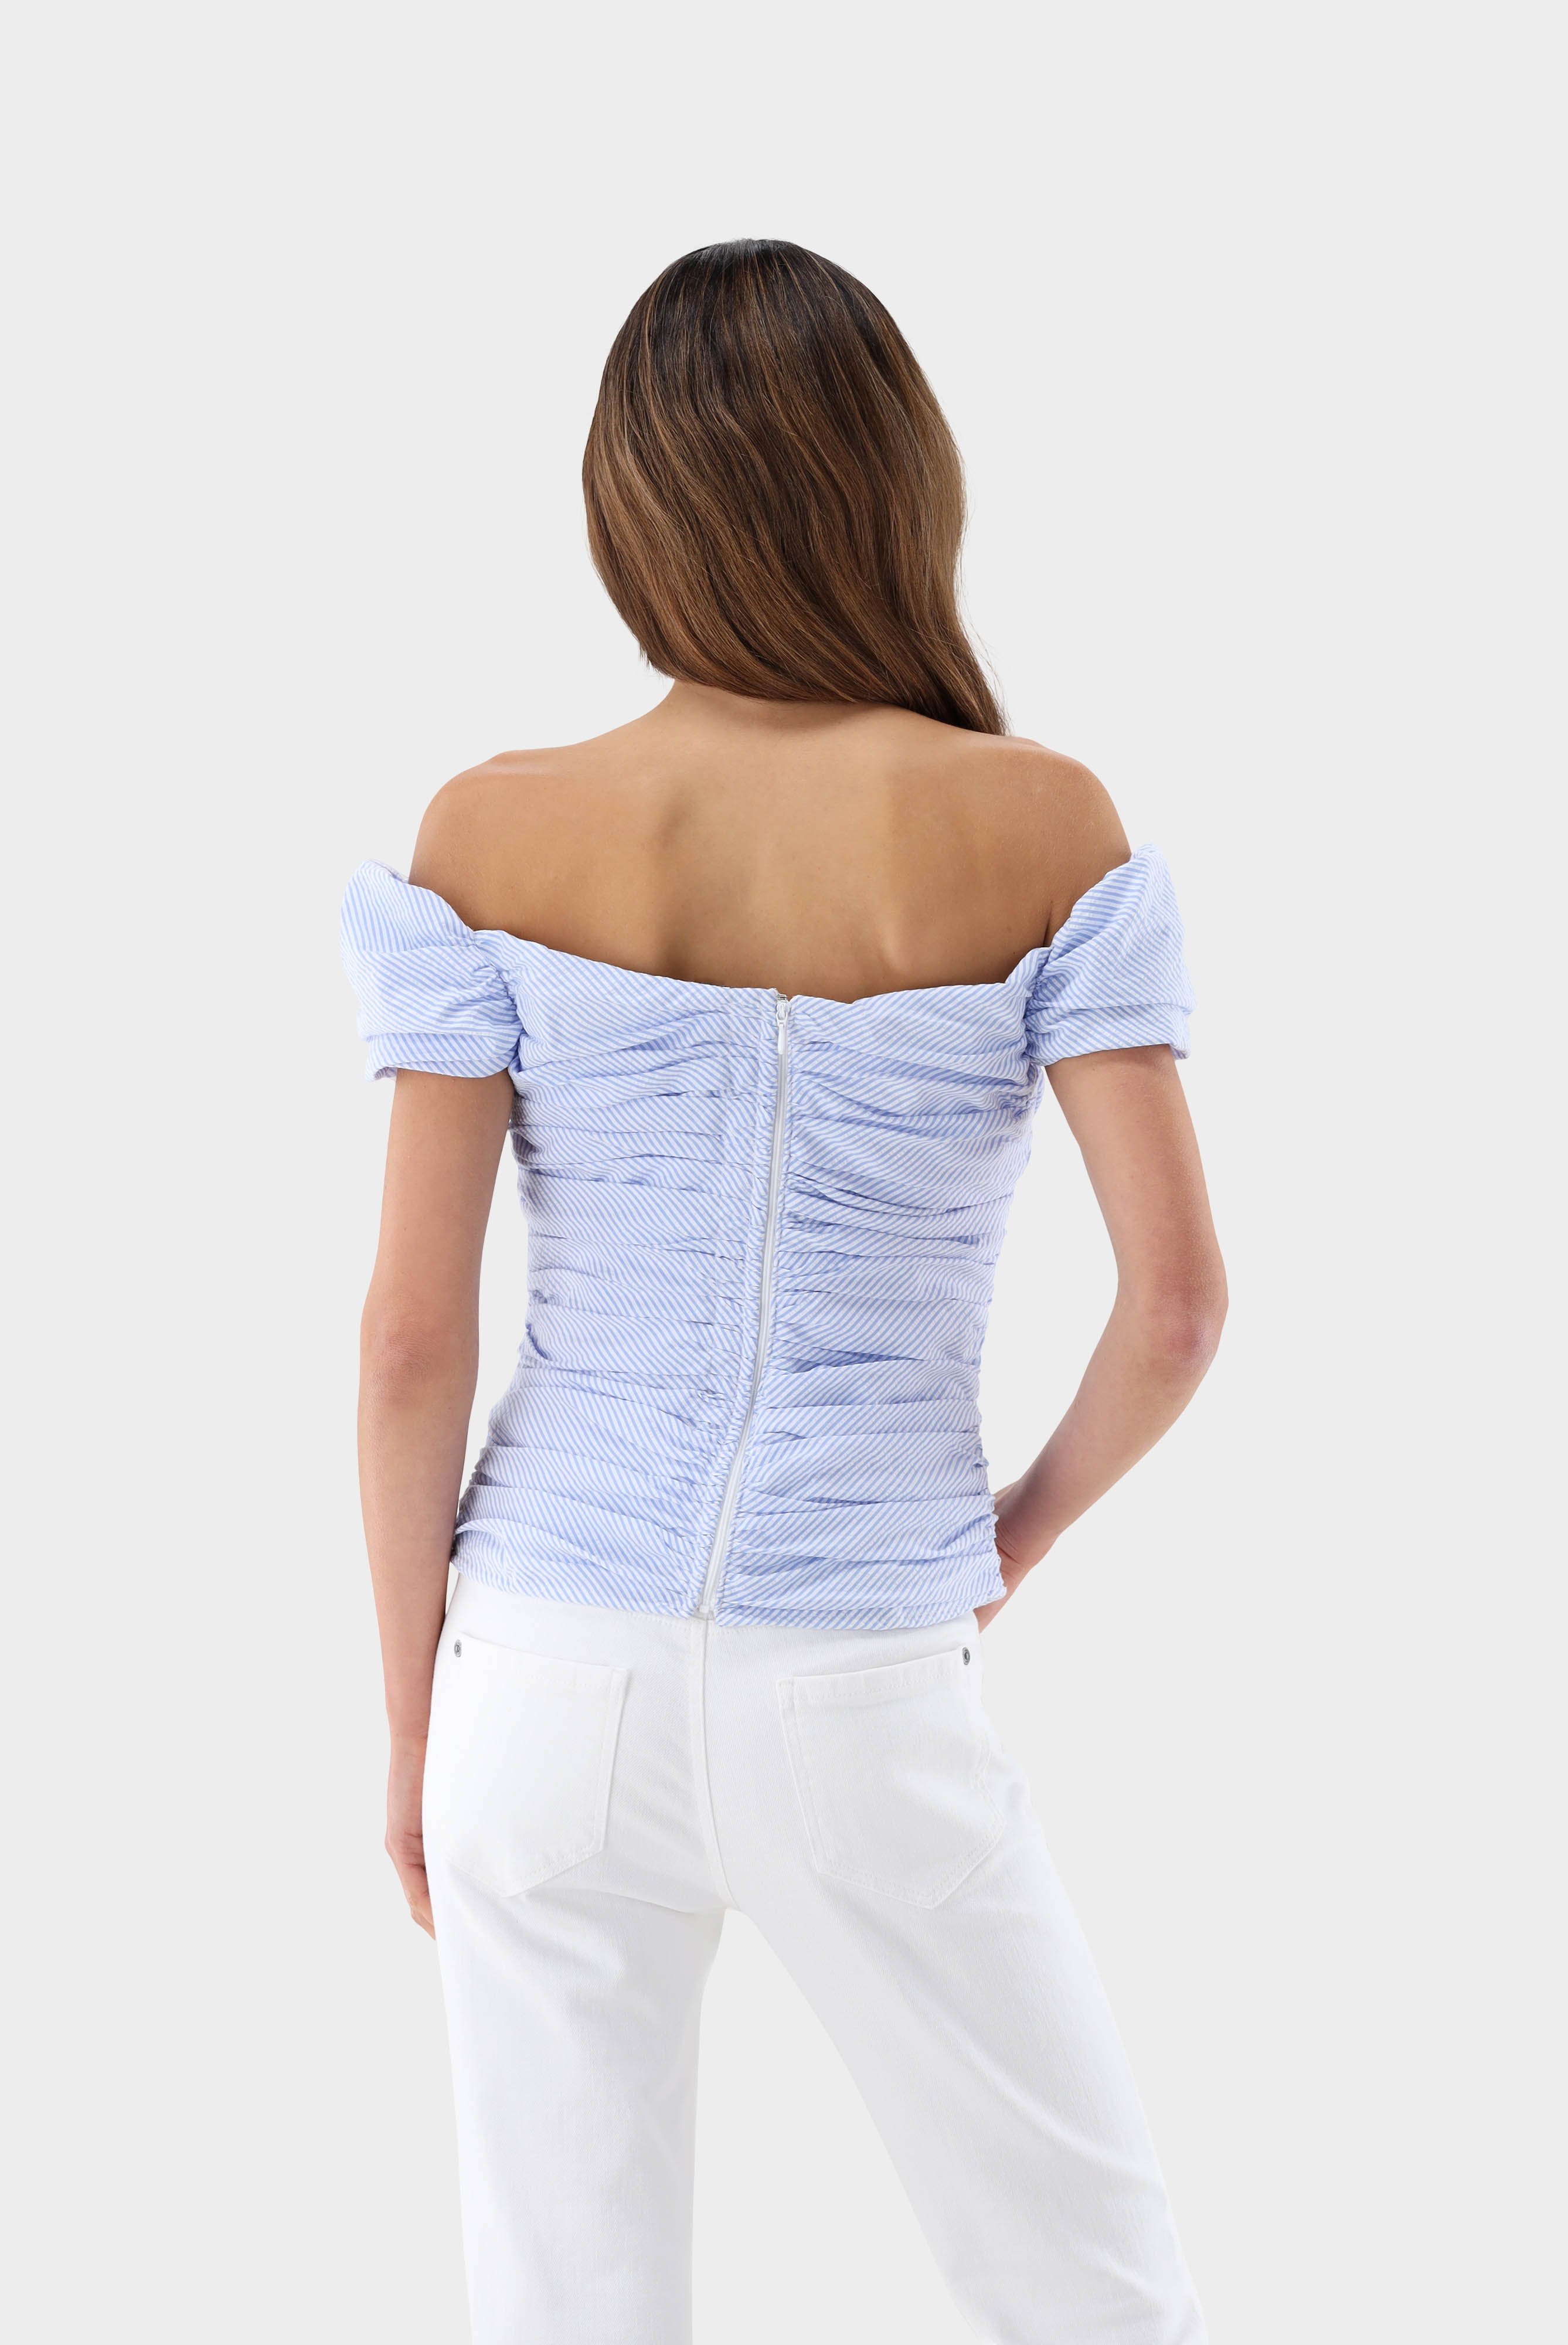 Casual Blouses+Bodice with Stripe Pattern+05.5288.18.151054.720.32